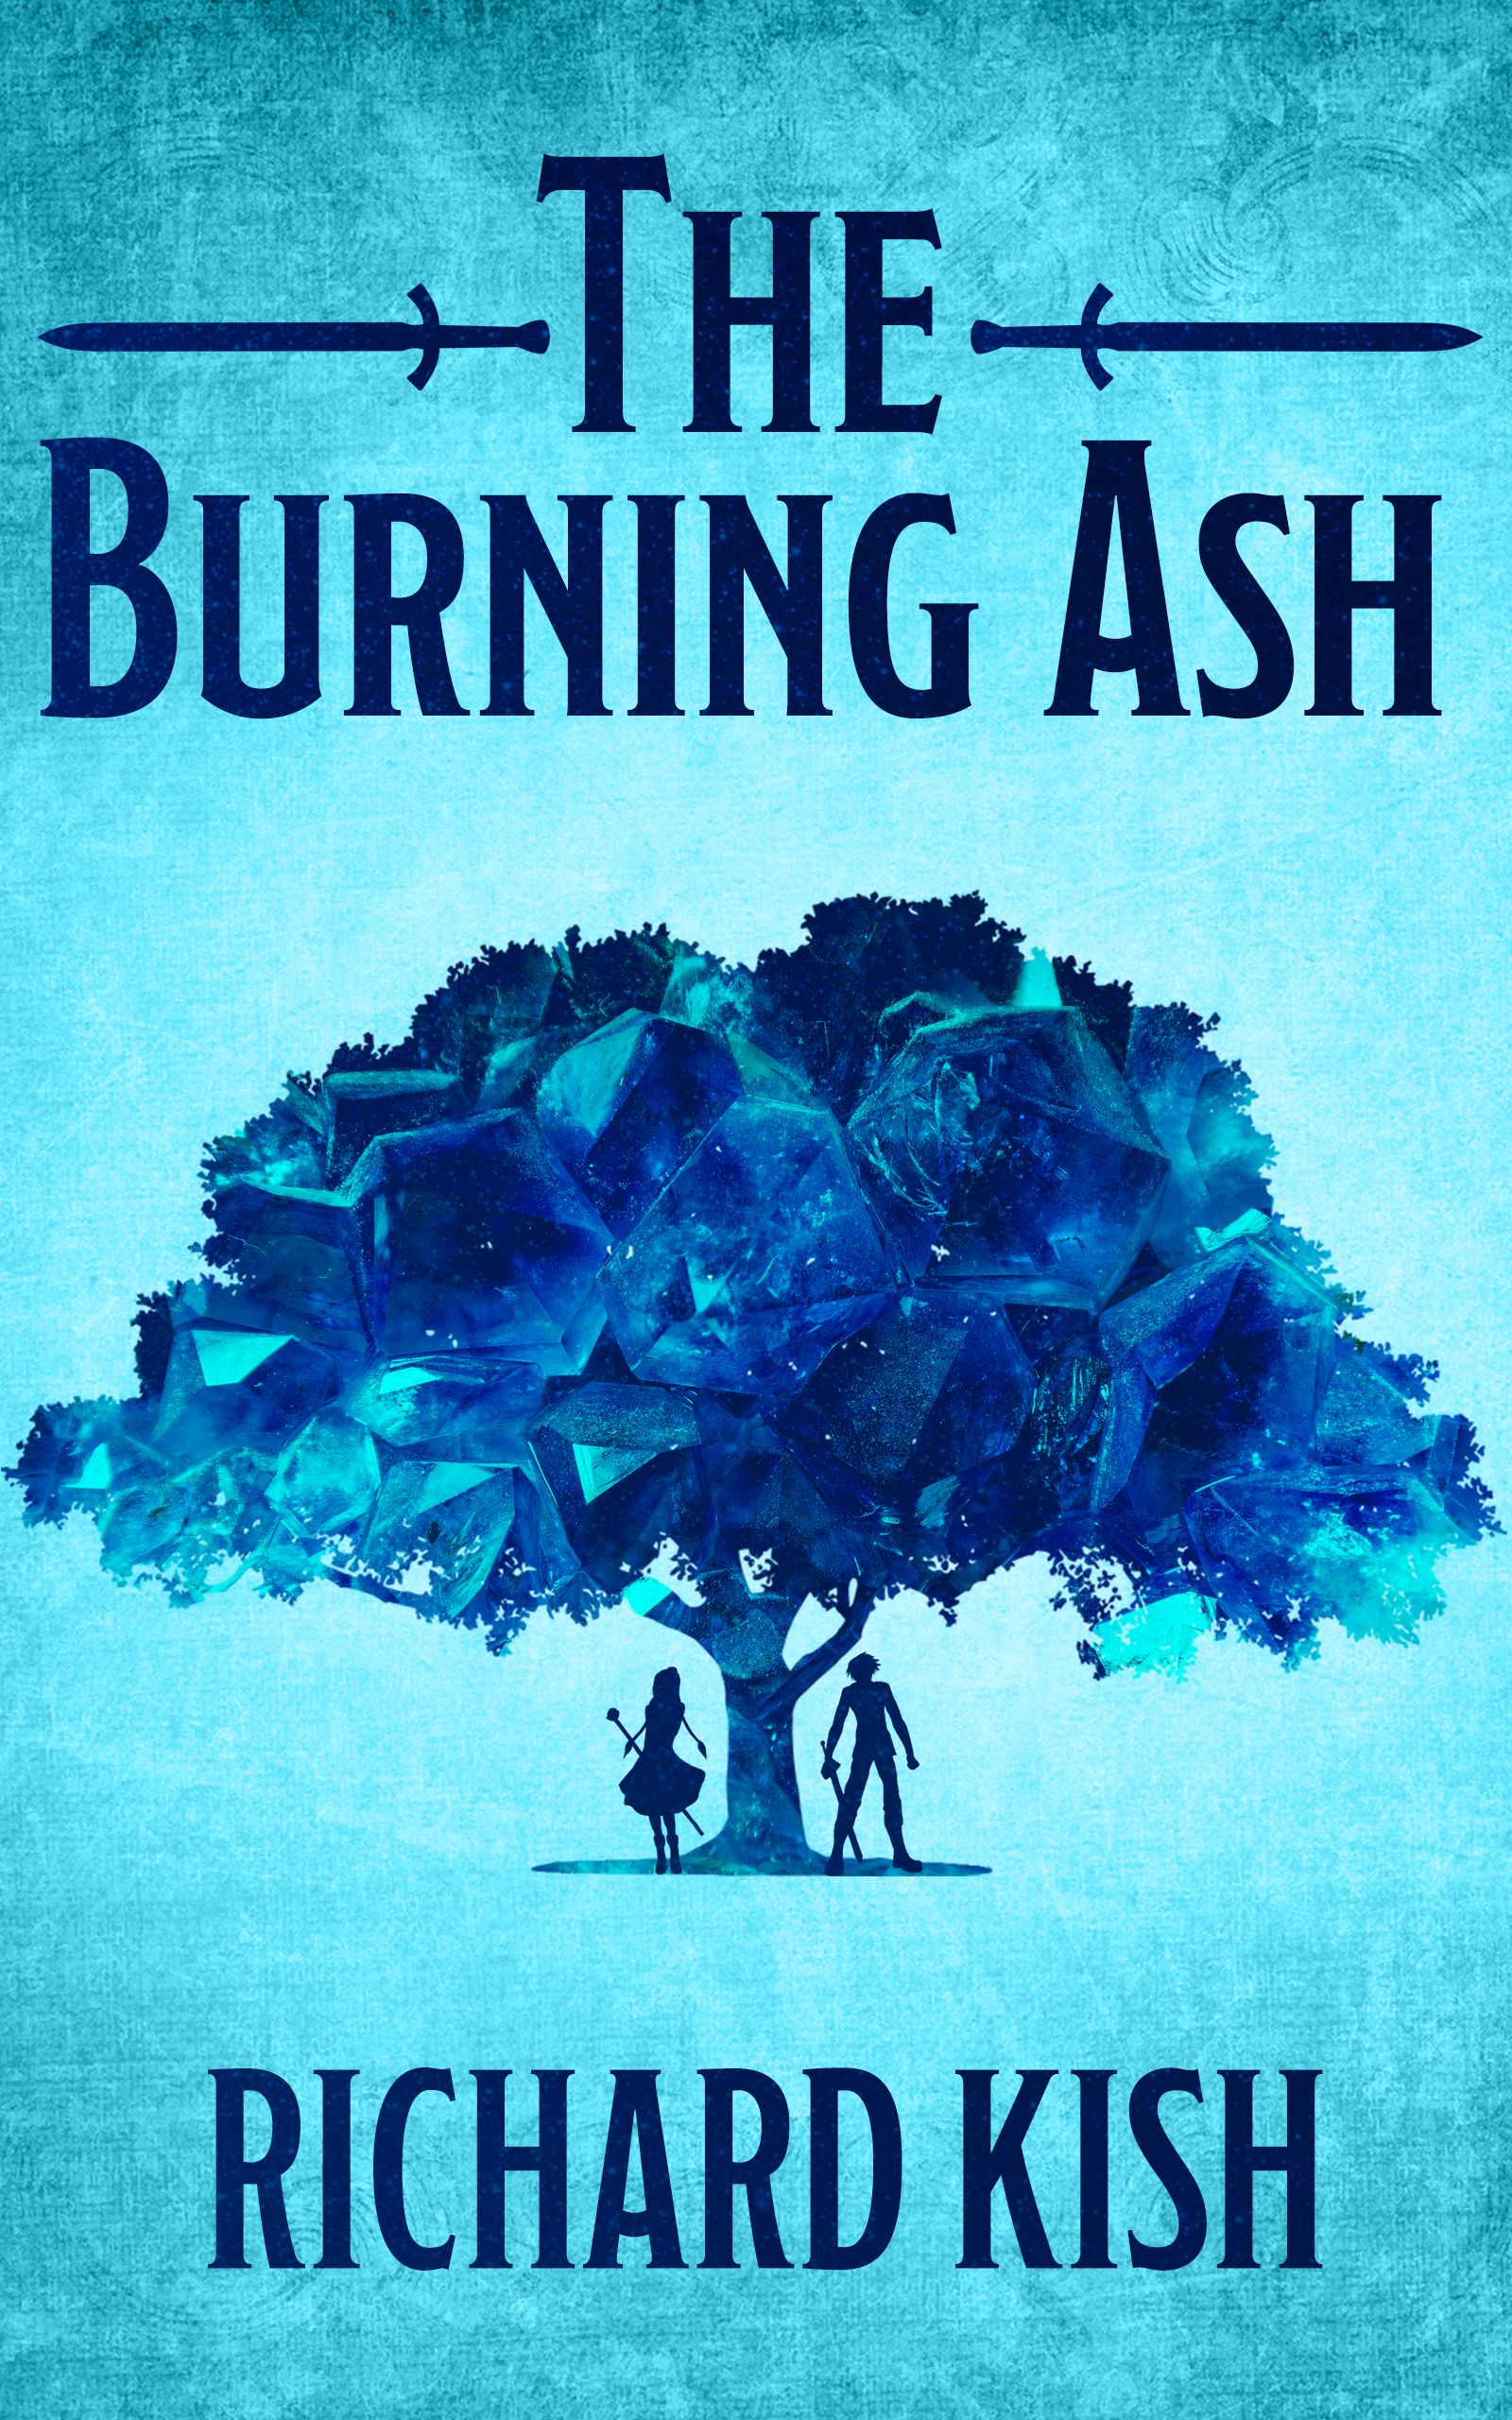 The Front Cover of The Burning Ash - Footer